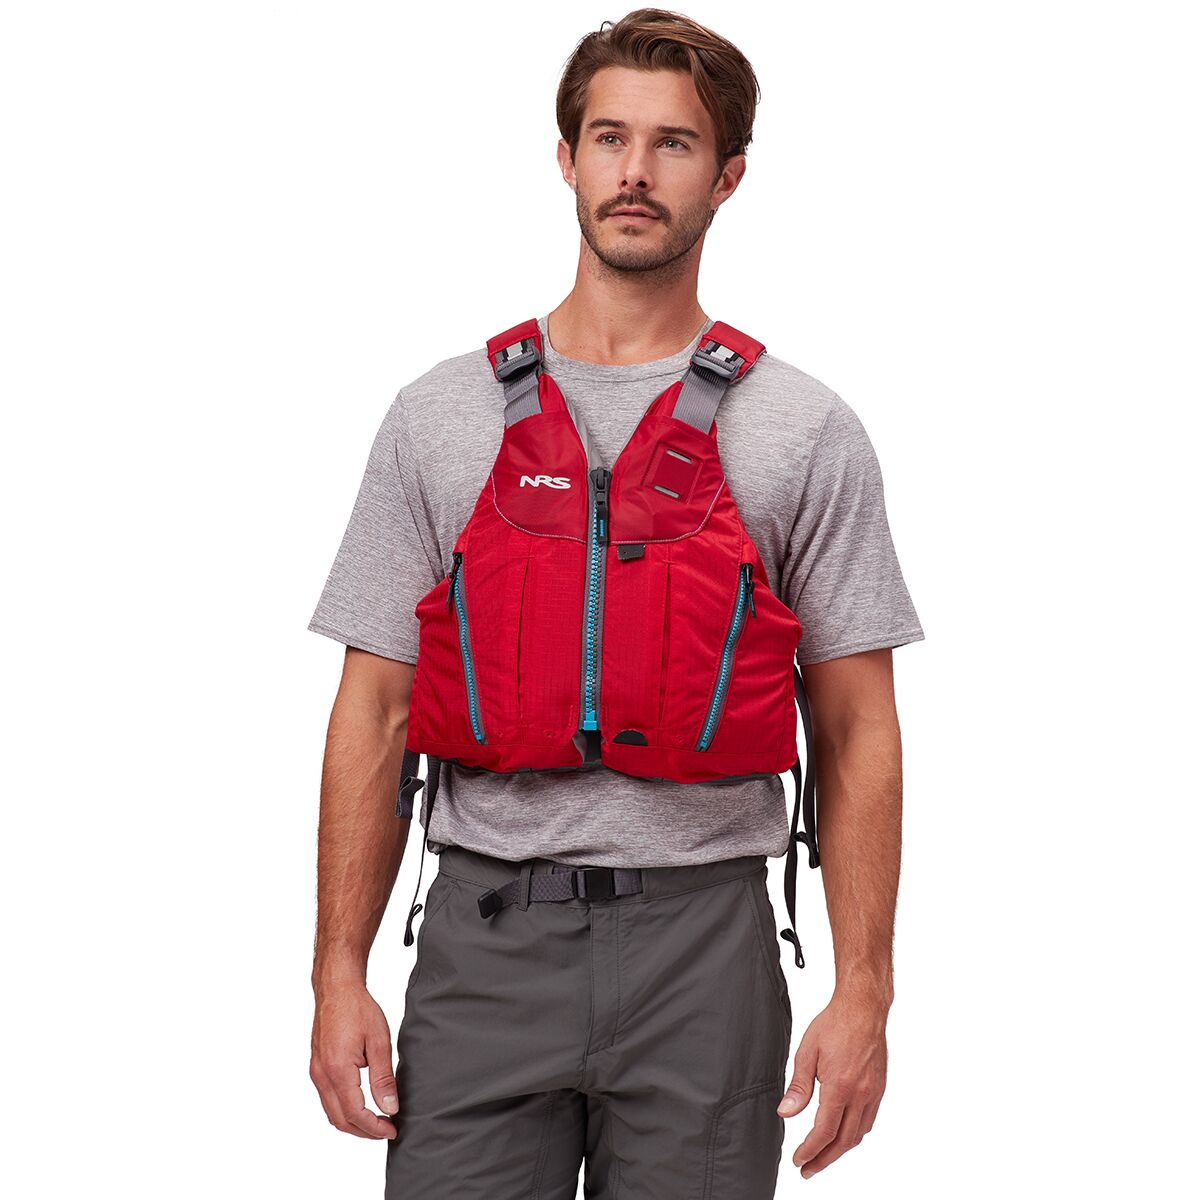 NRS Oso Personal Flotation Device - Men's